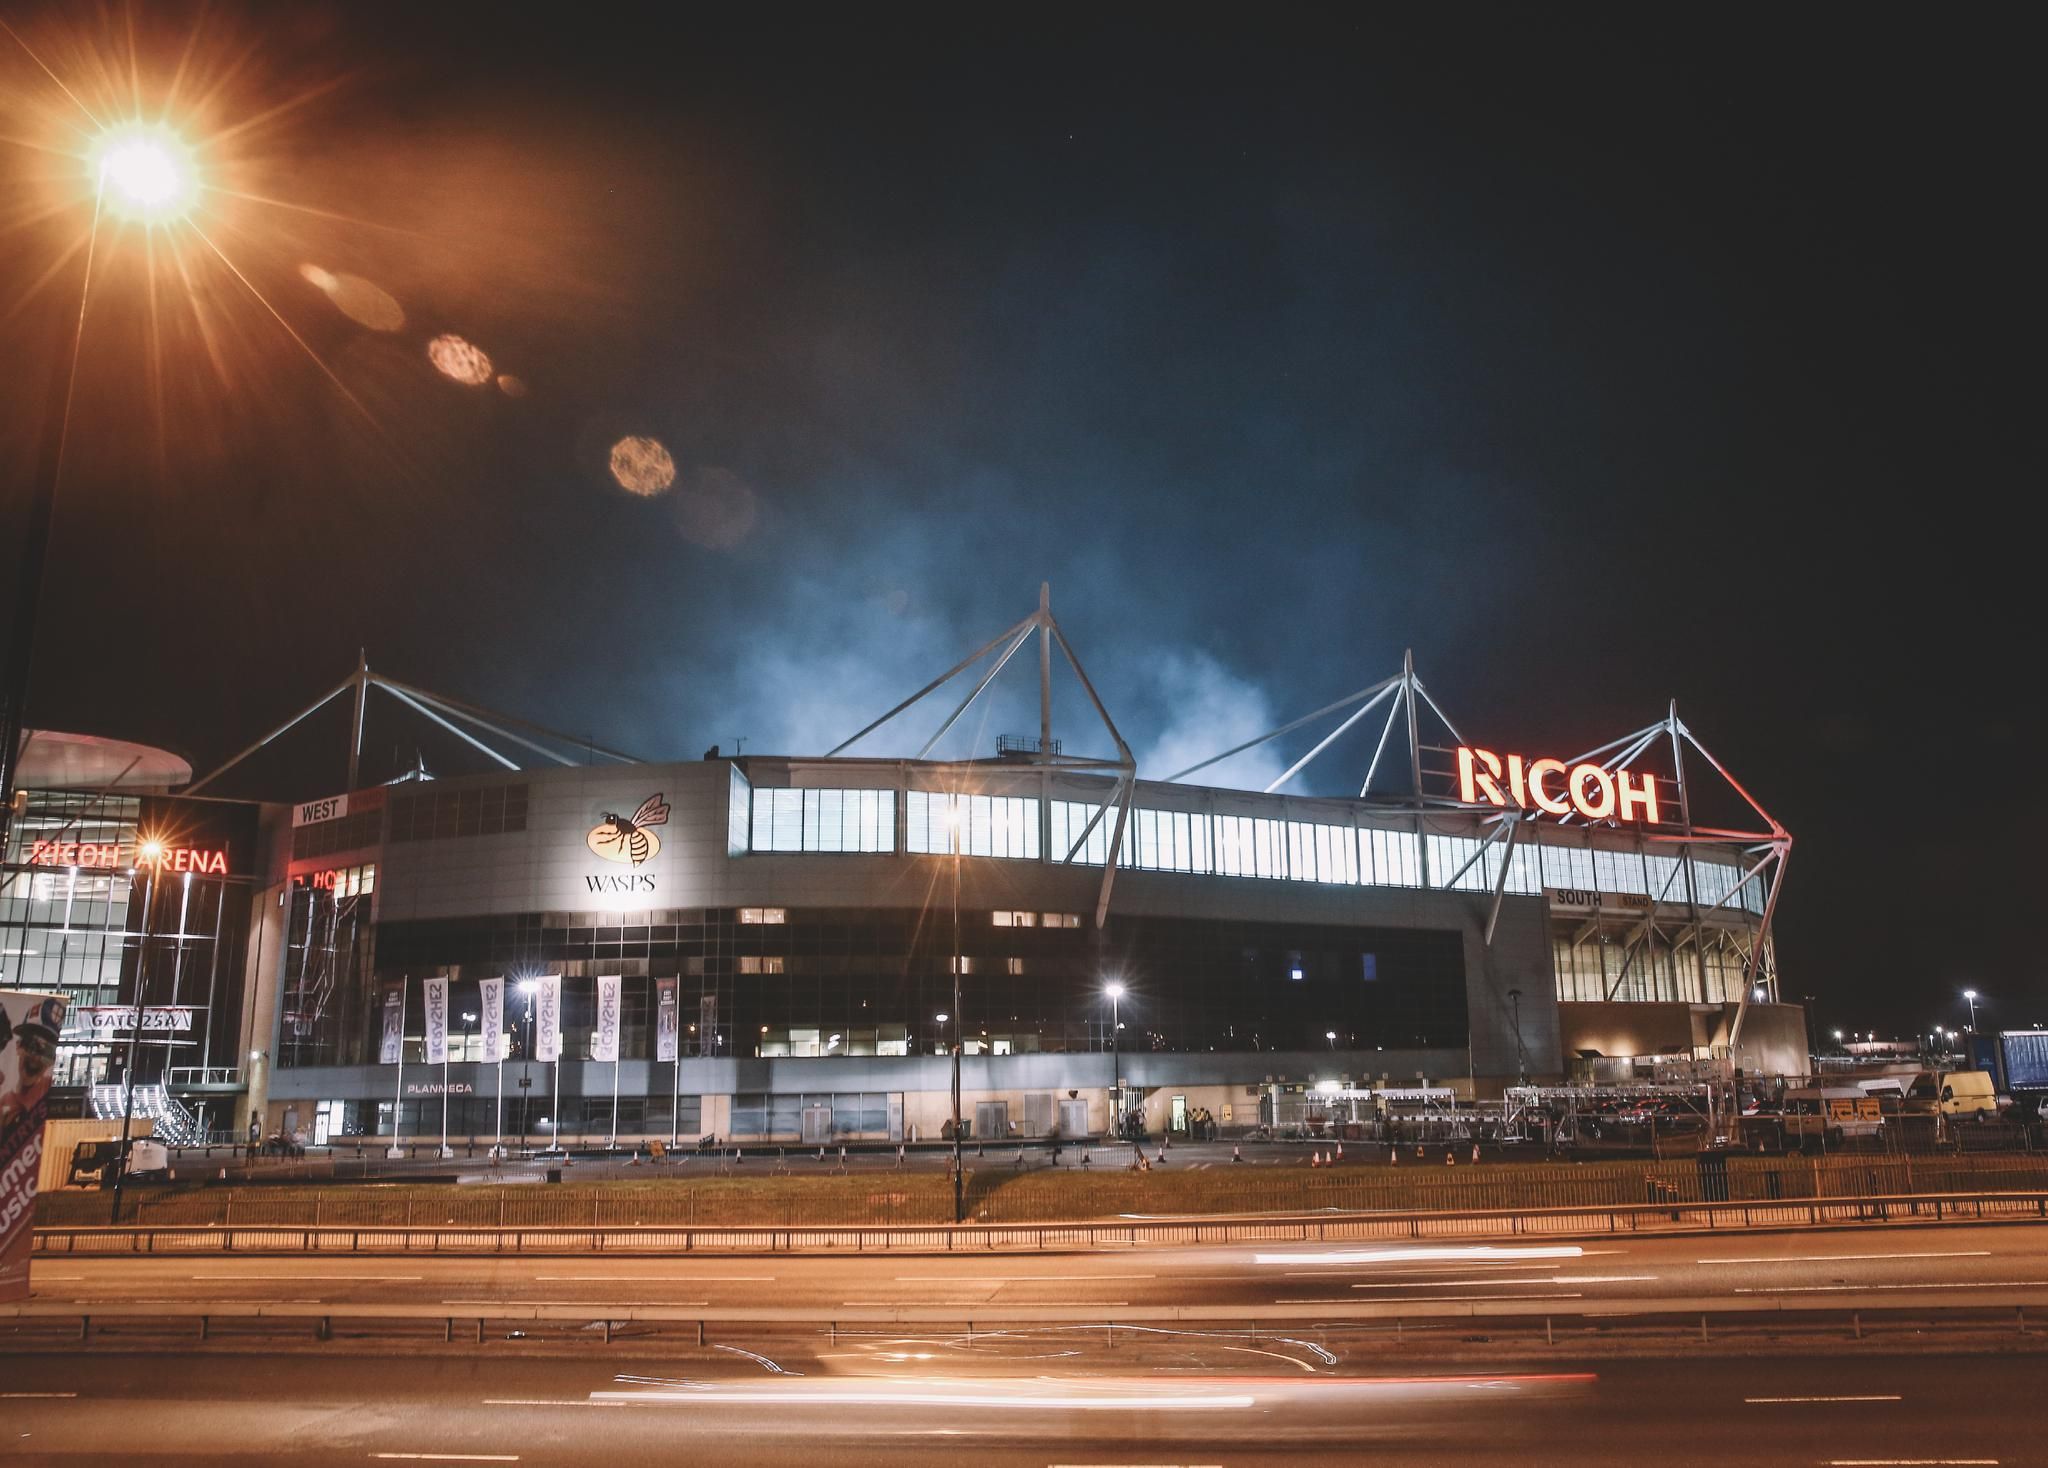 Ricoh Arena smashes record for number of events and visitors